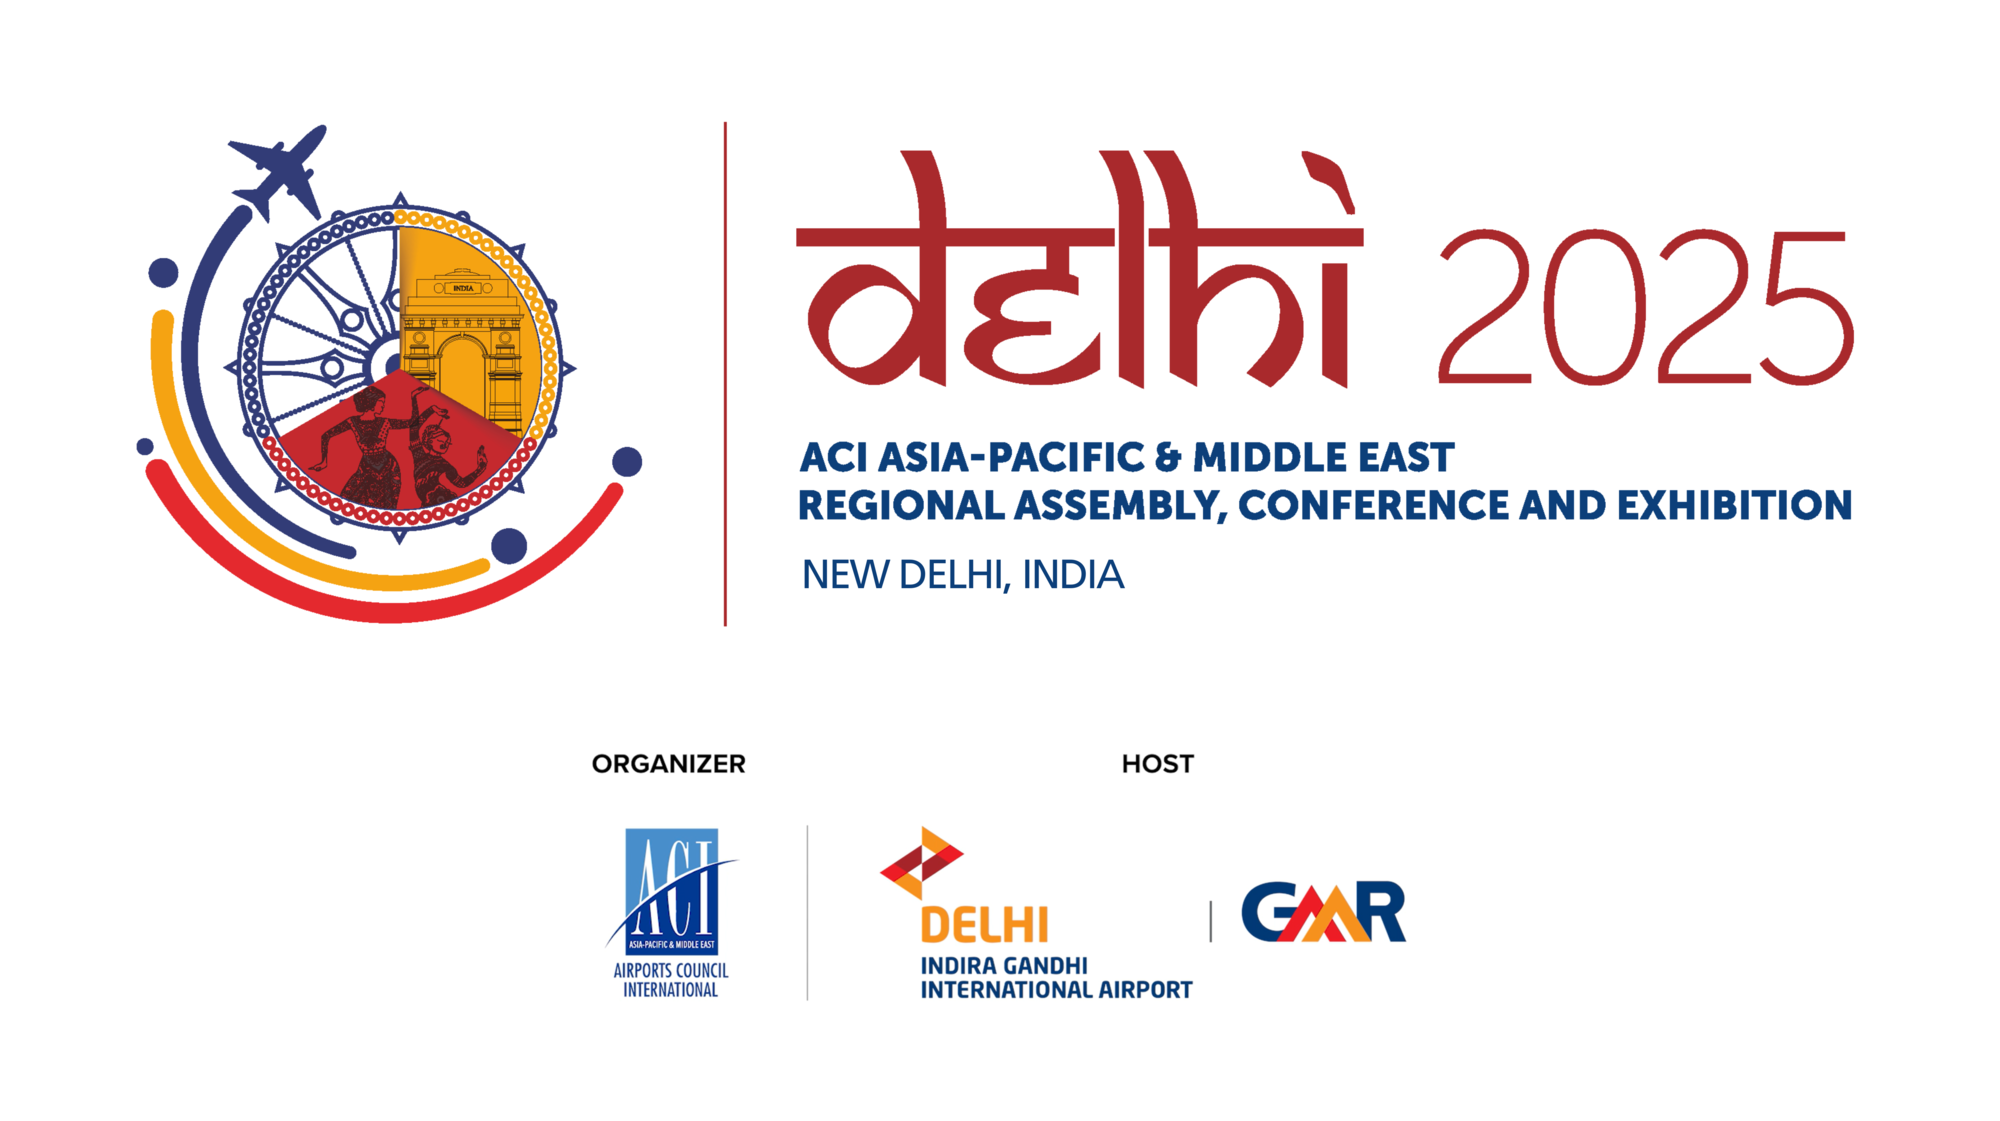 ACI Asia-Pacific & Middle East Regional Assembly, Conference and Exhibition 2025